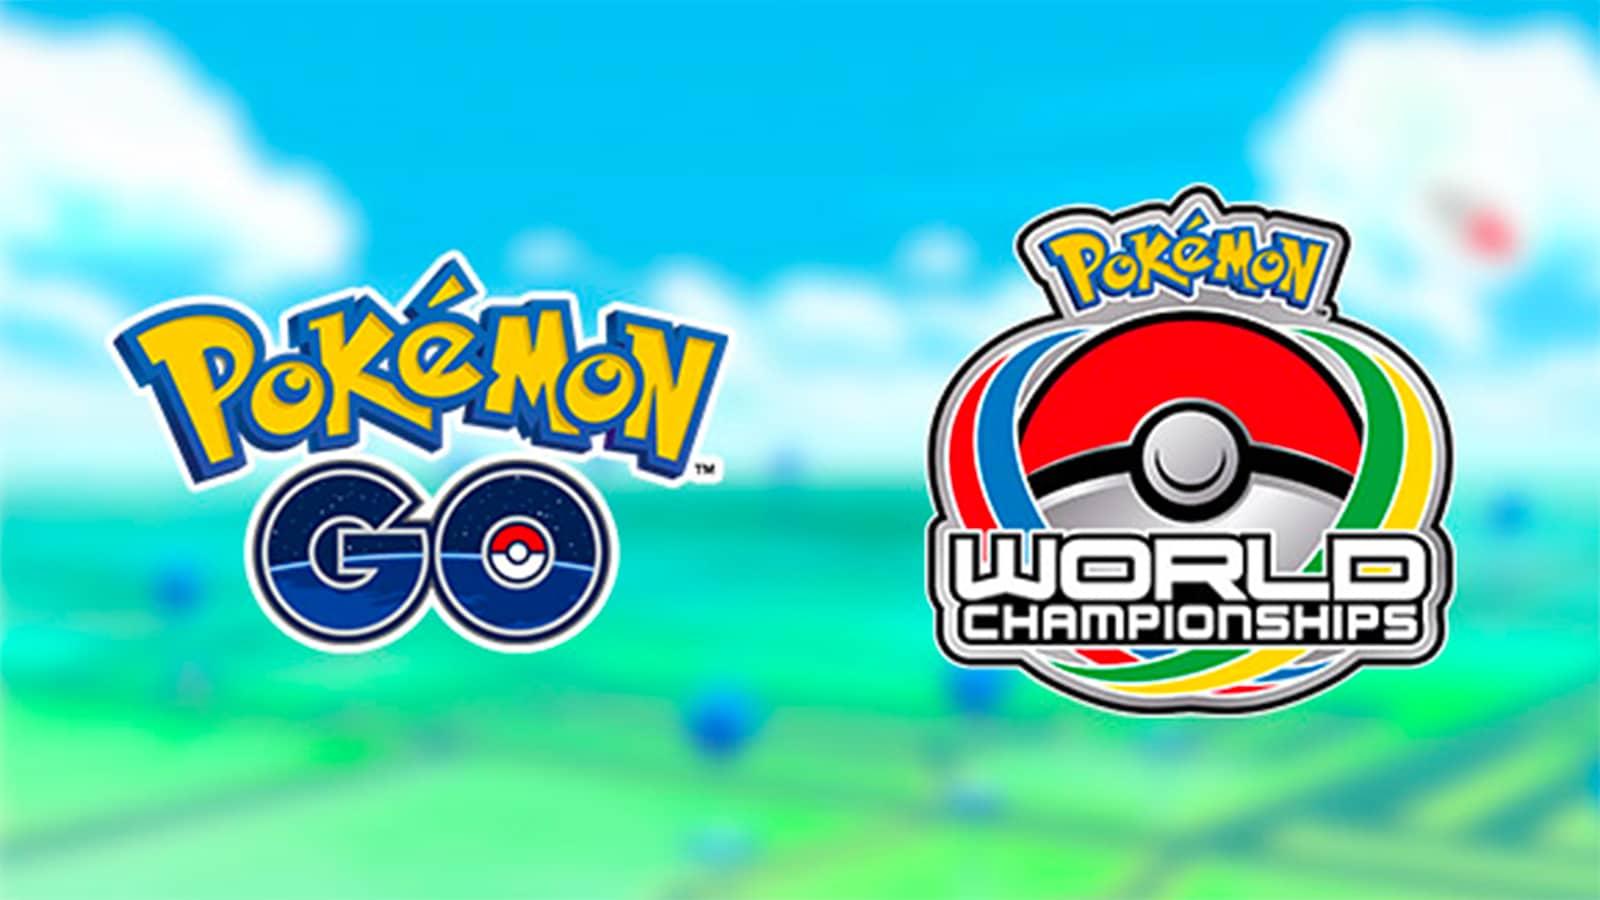 Pokemon Go World Championships Timed Research & Field Research rewards